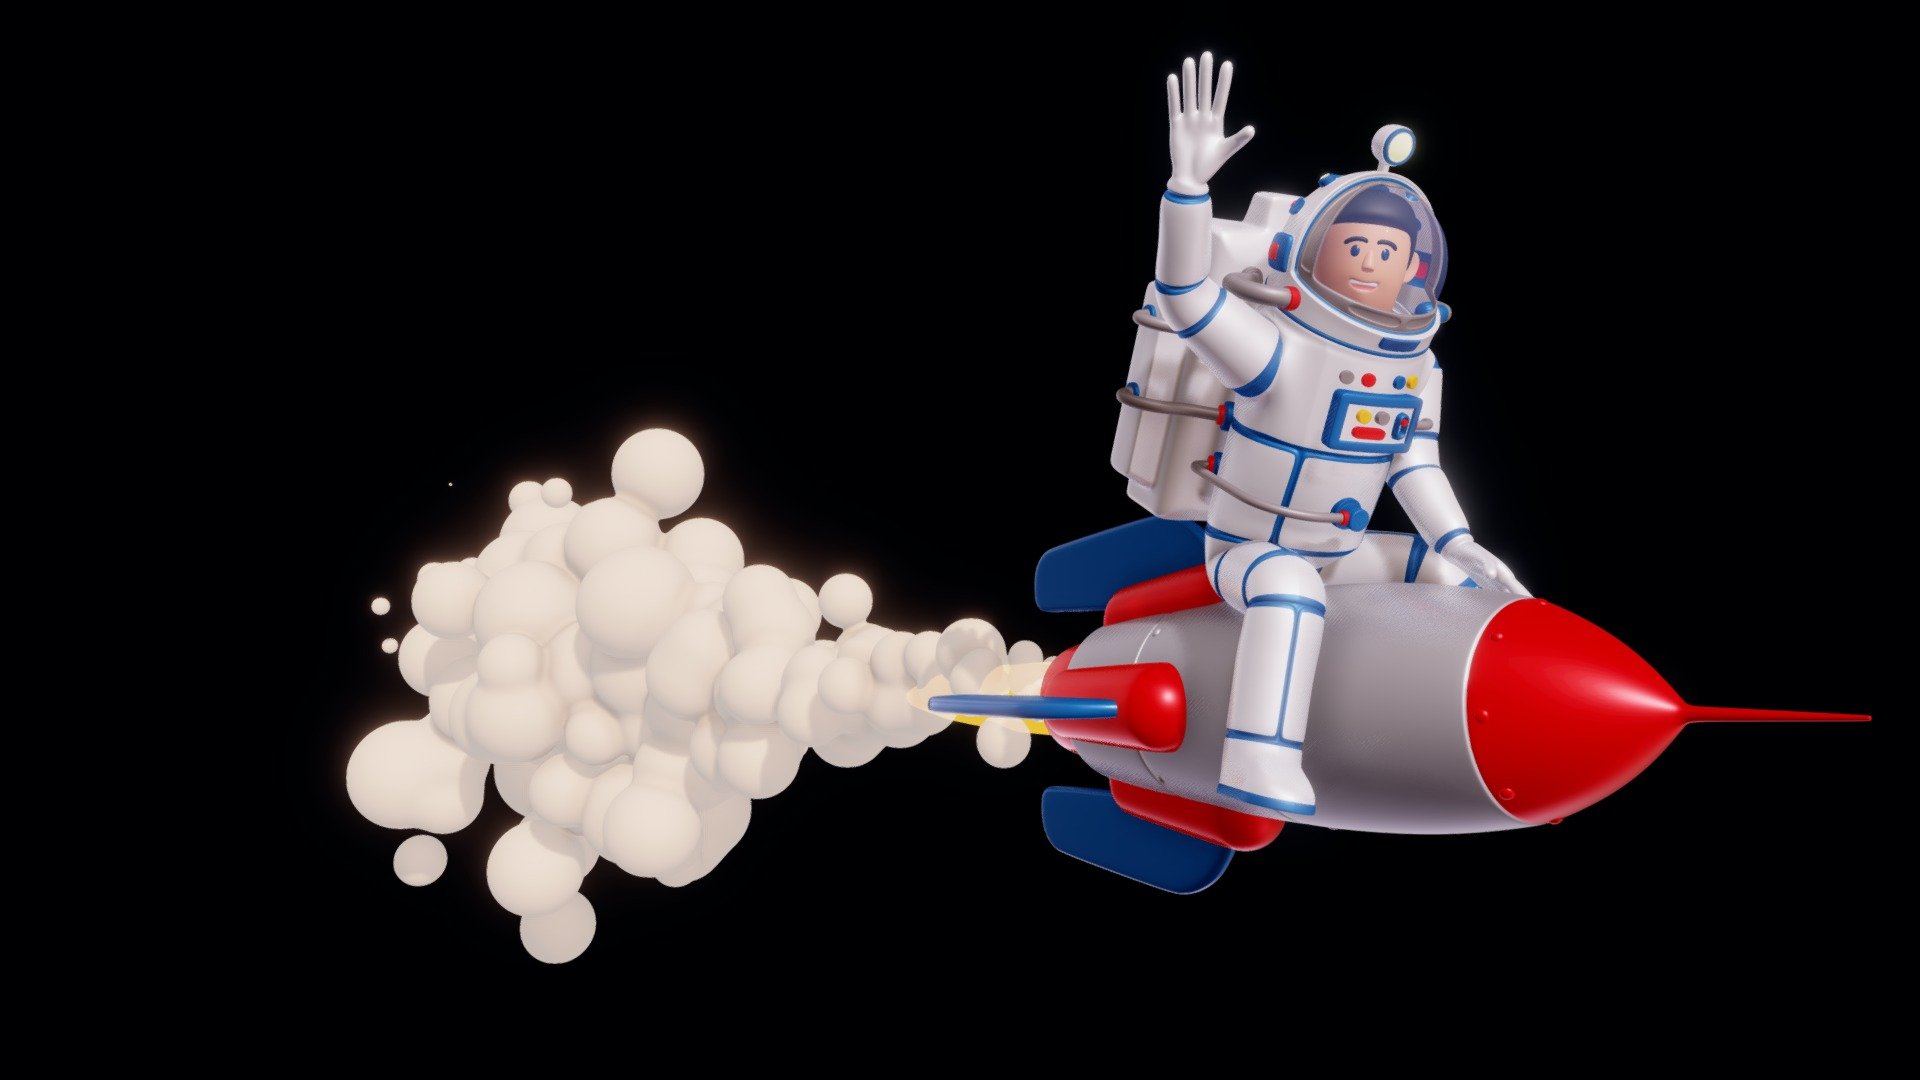 Astronaut in spacesuit riding on rocket that releases flames and smoke.
Made in Blander 3d 3d model